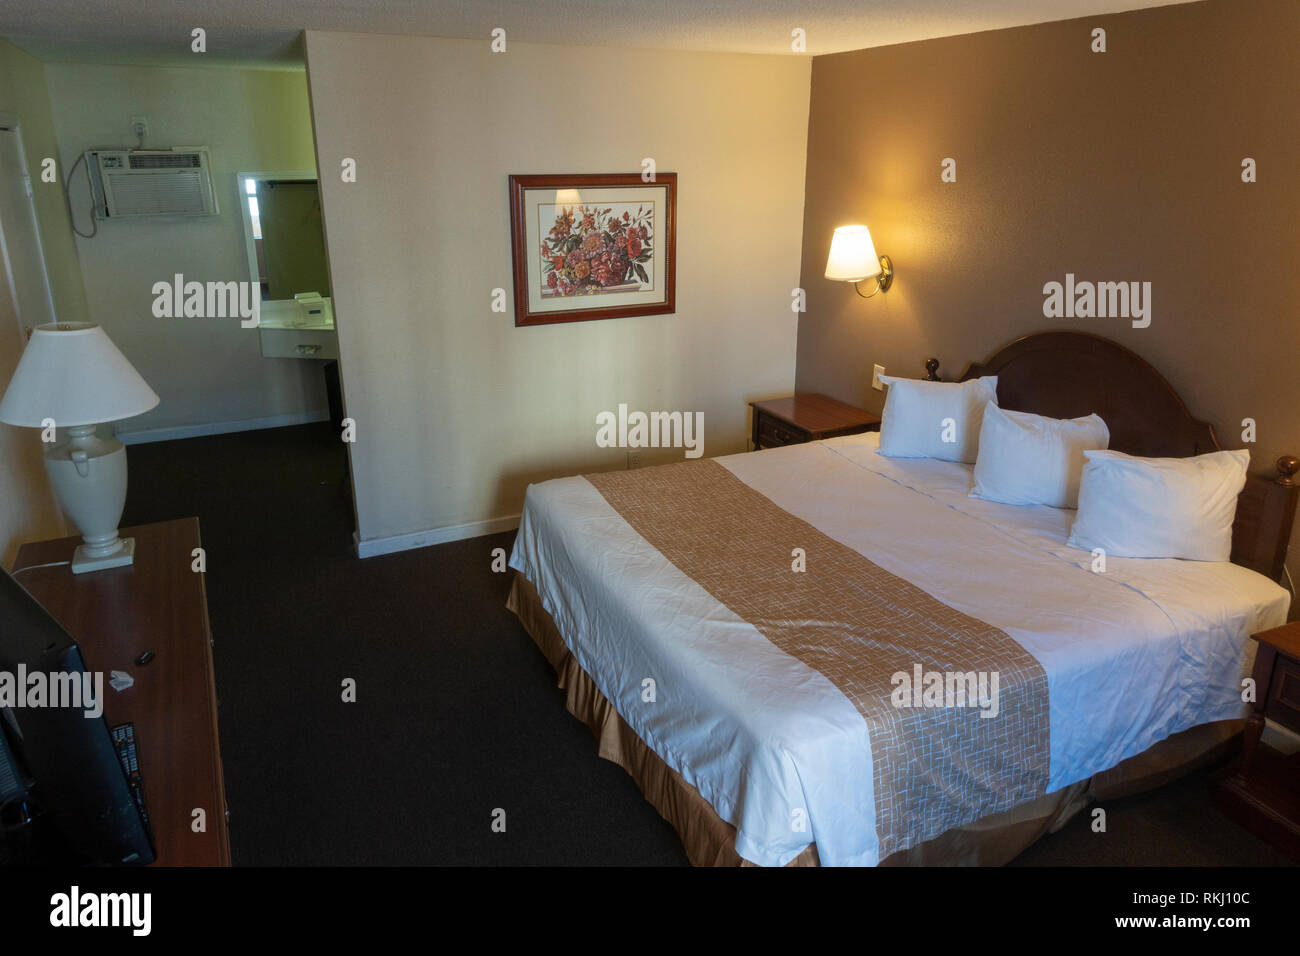 Typical bedroom at the Travelodge Las Vegas Center Strip two star hotel, Las Vegas, Nevada, United States. Stock Photo